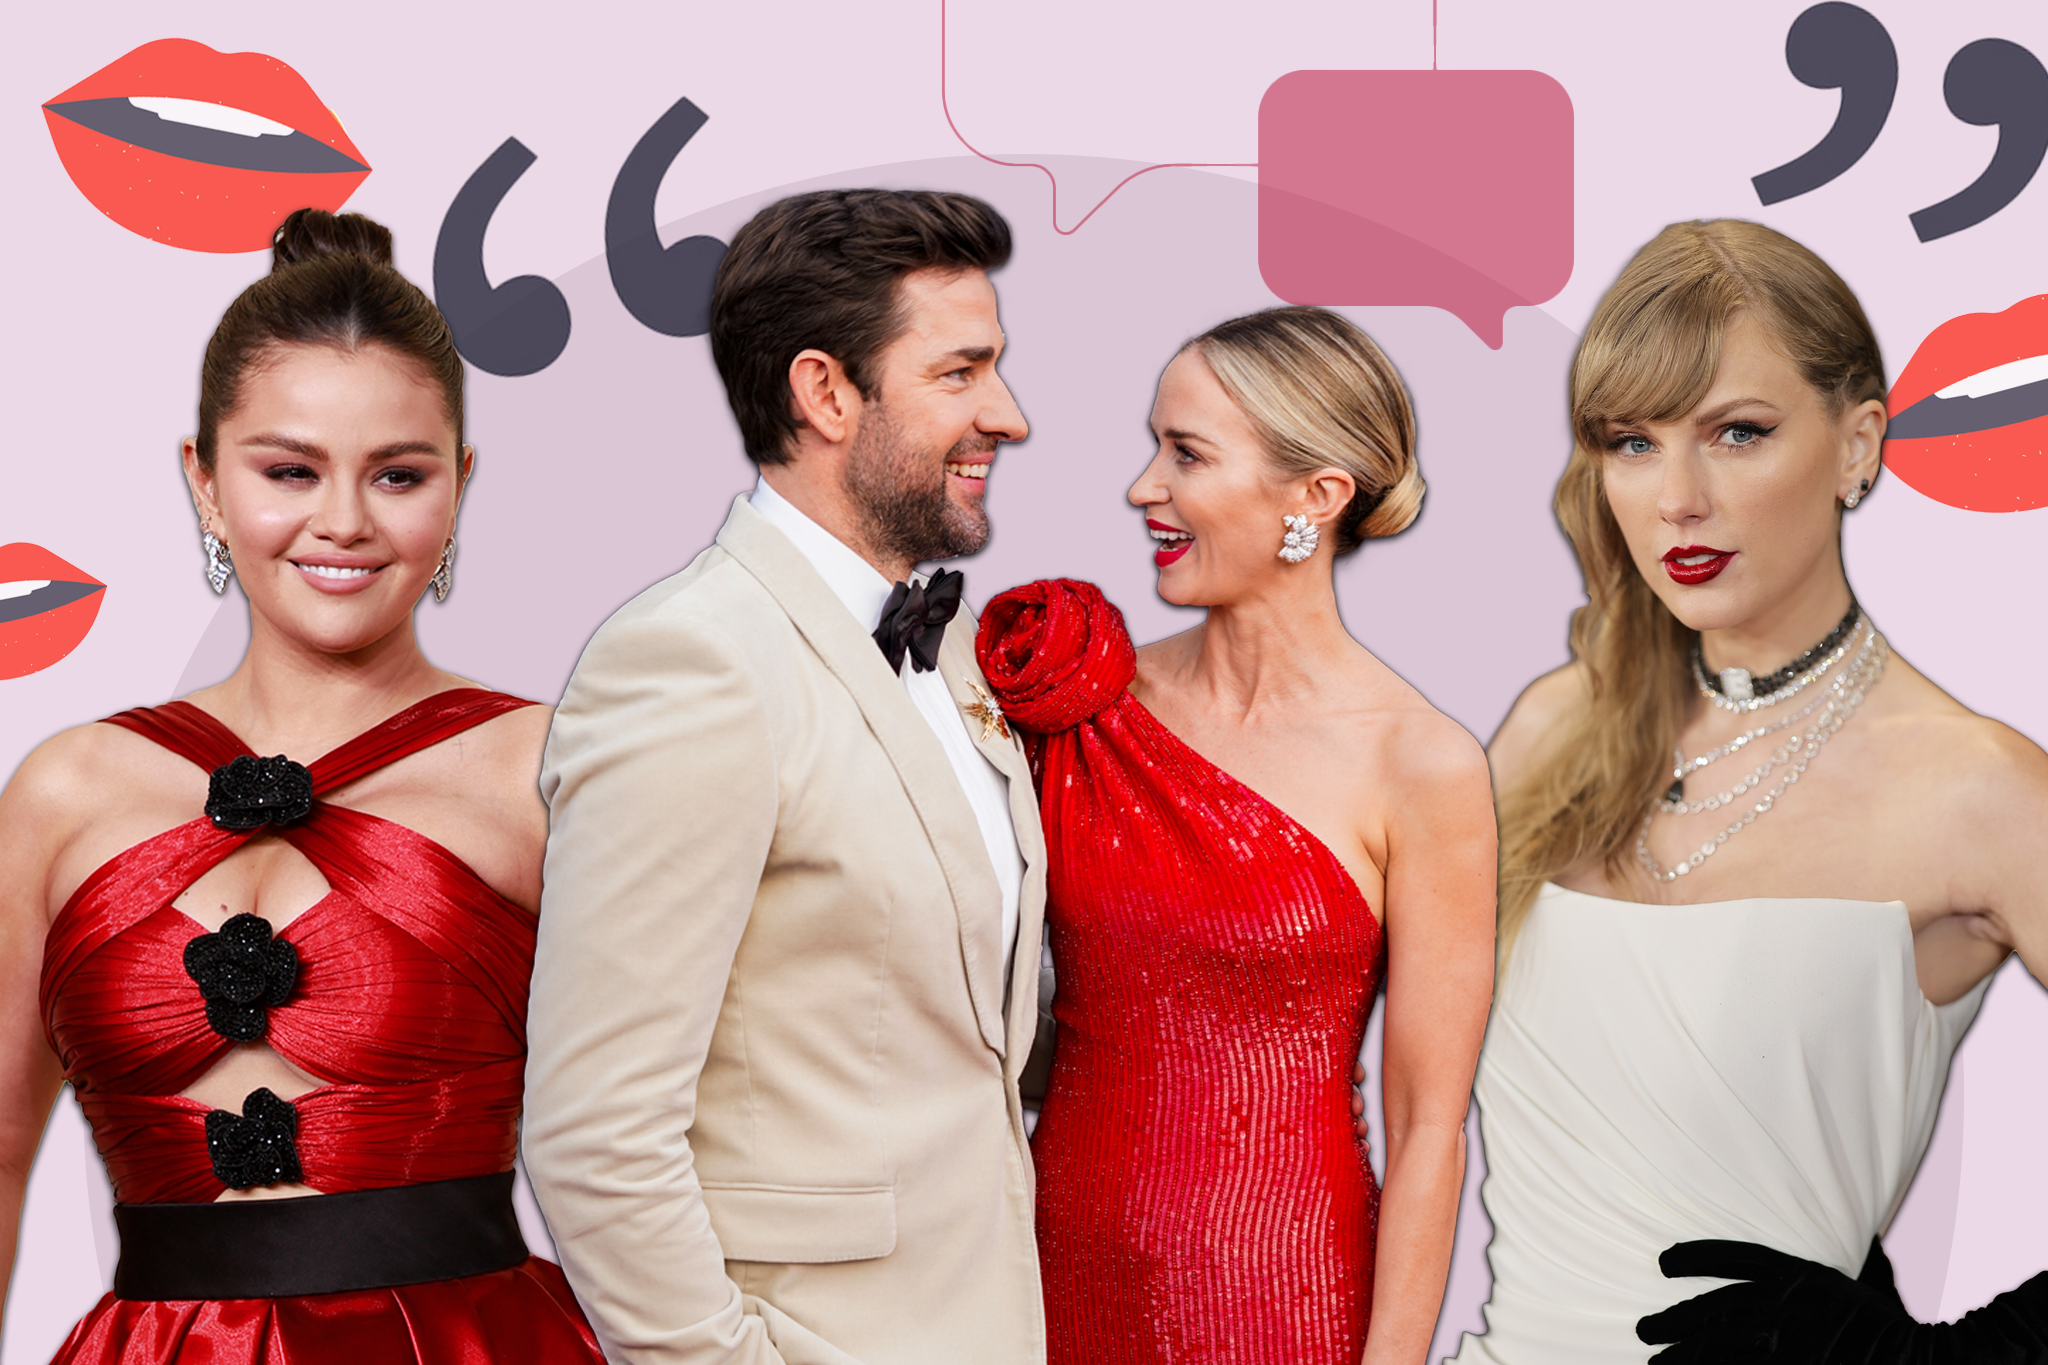 The lips of stars such as Selena Gomez, Taylor Swift, John Krasinski and Emily Blunt have been fastidiously read in recent months